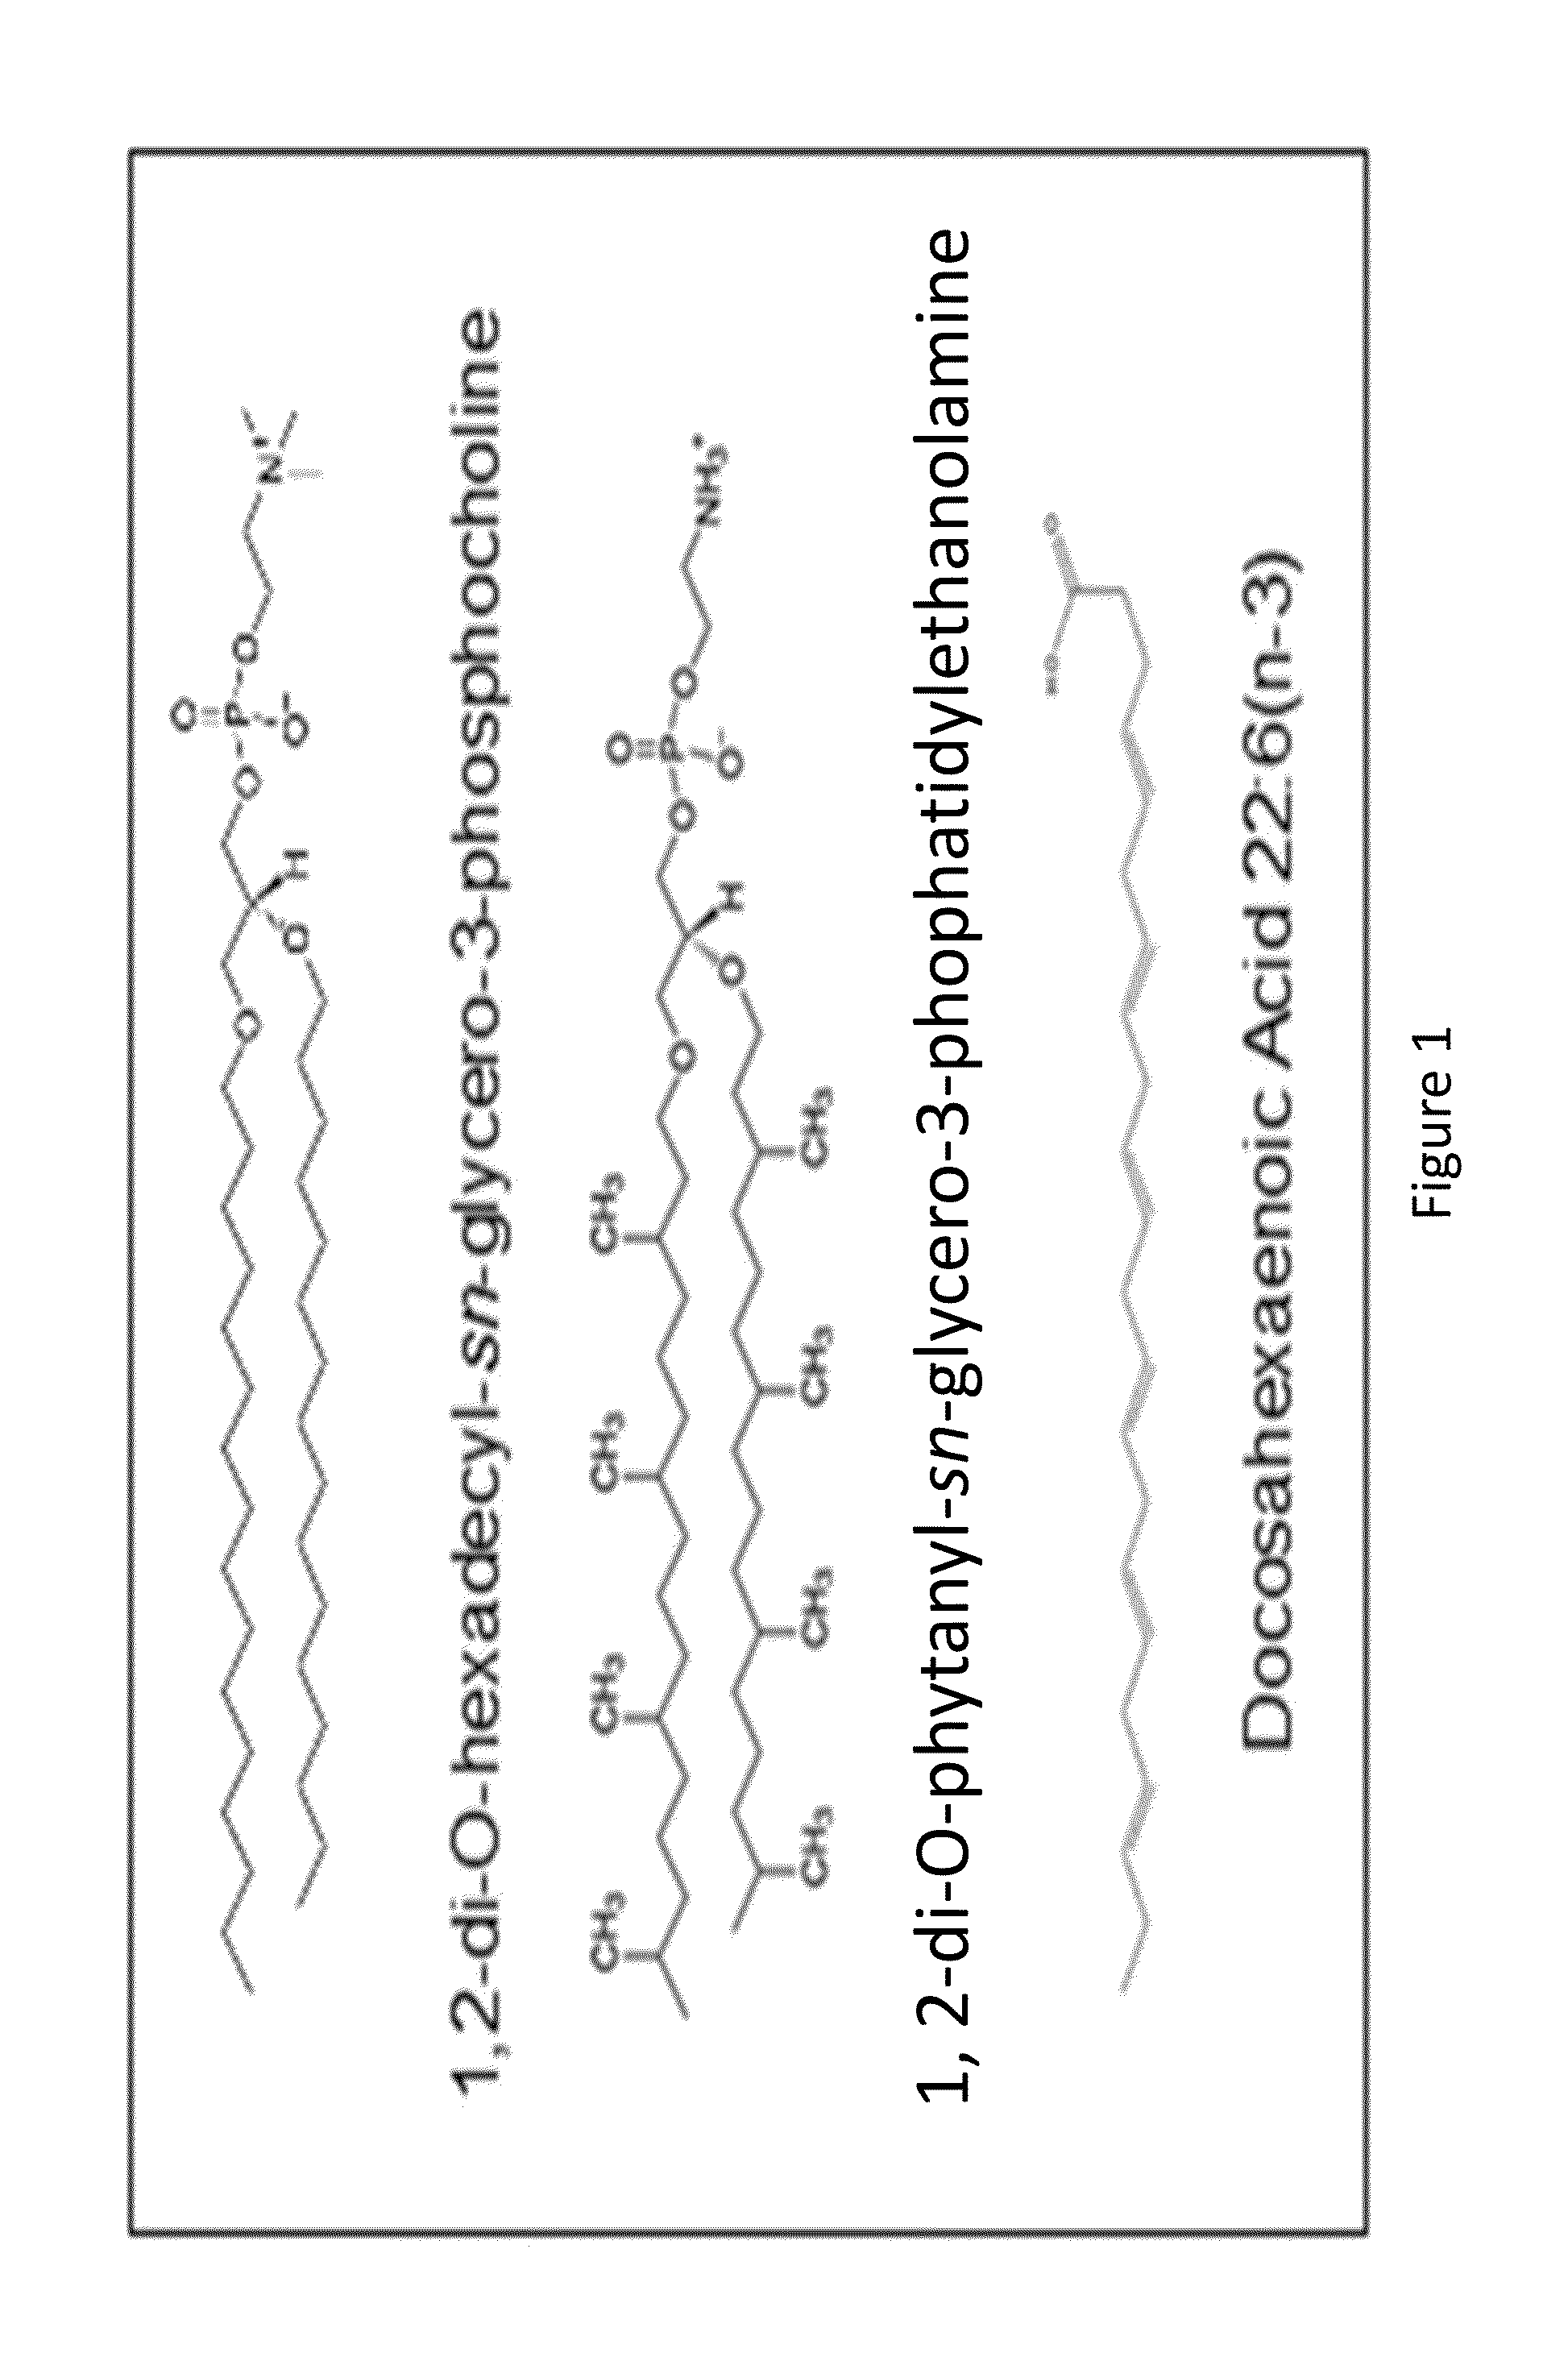 Acid Stable Liposomal Compositions And Methods For Producing The Same